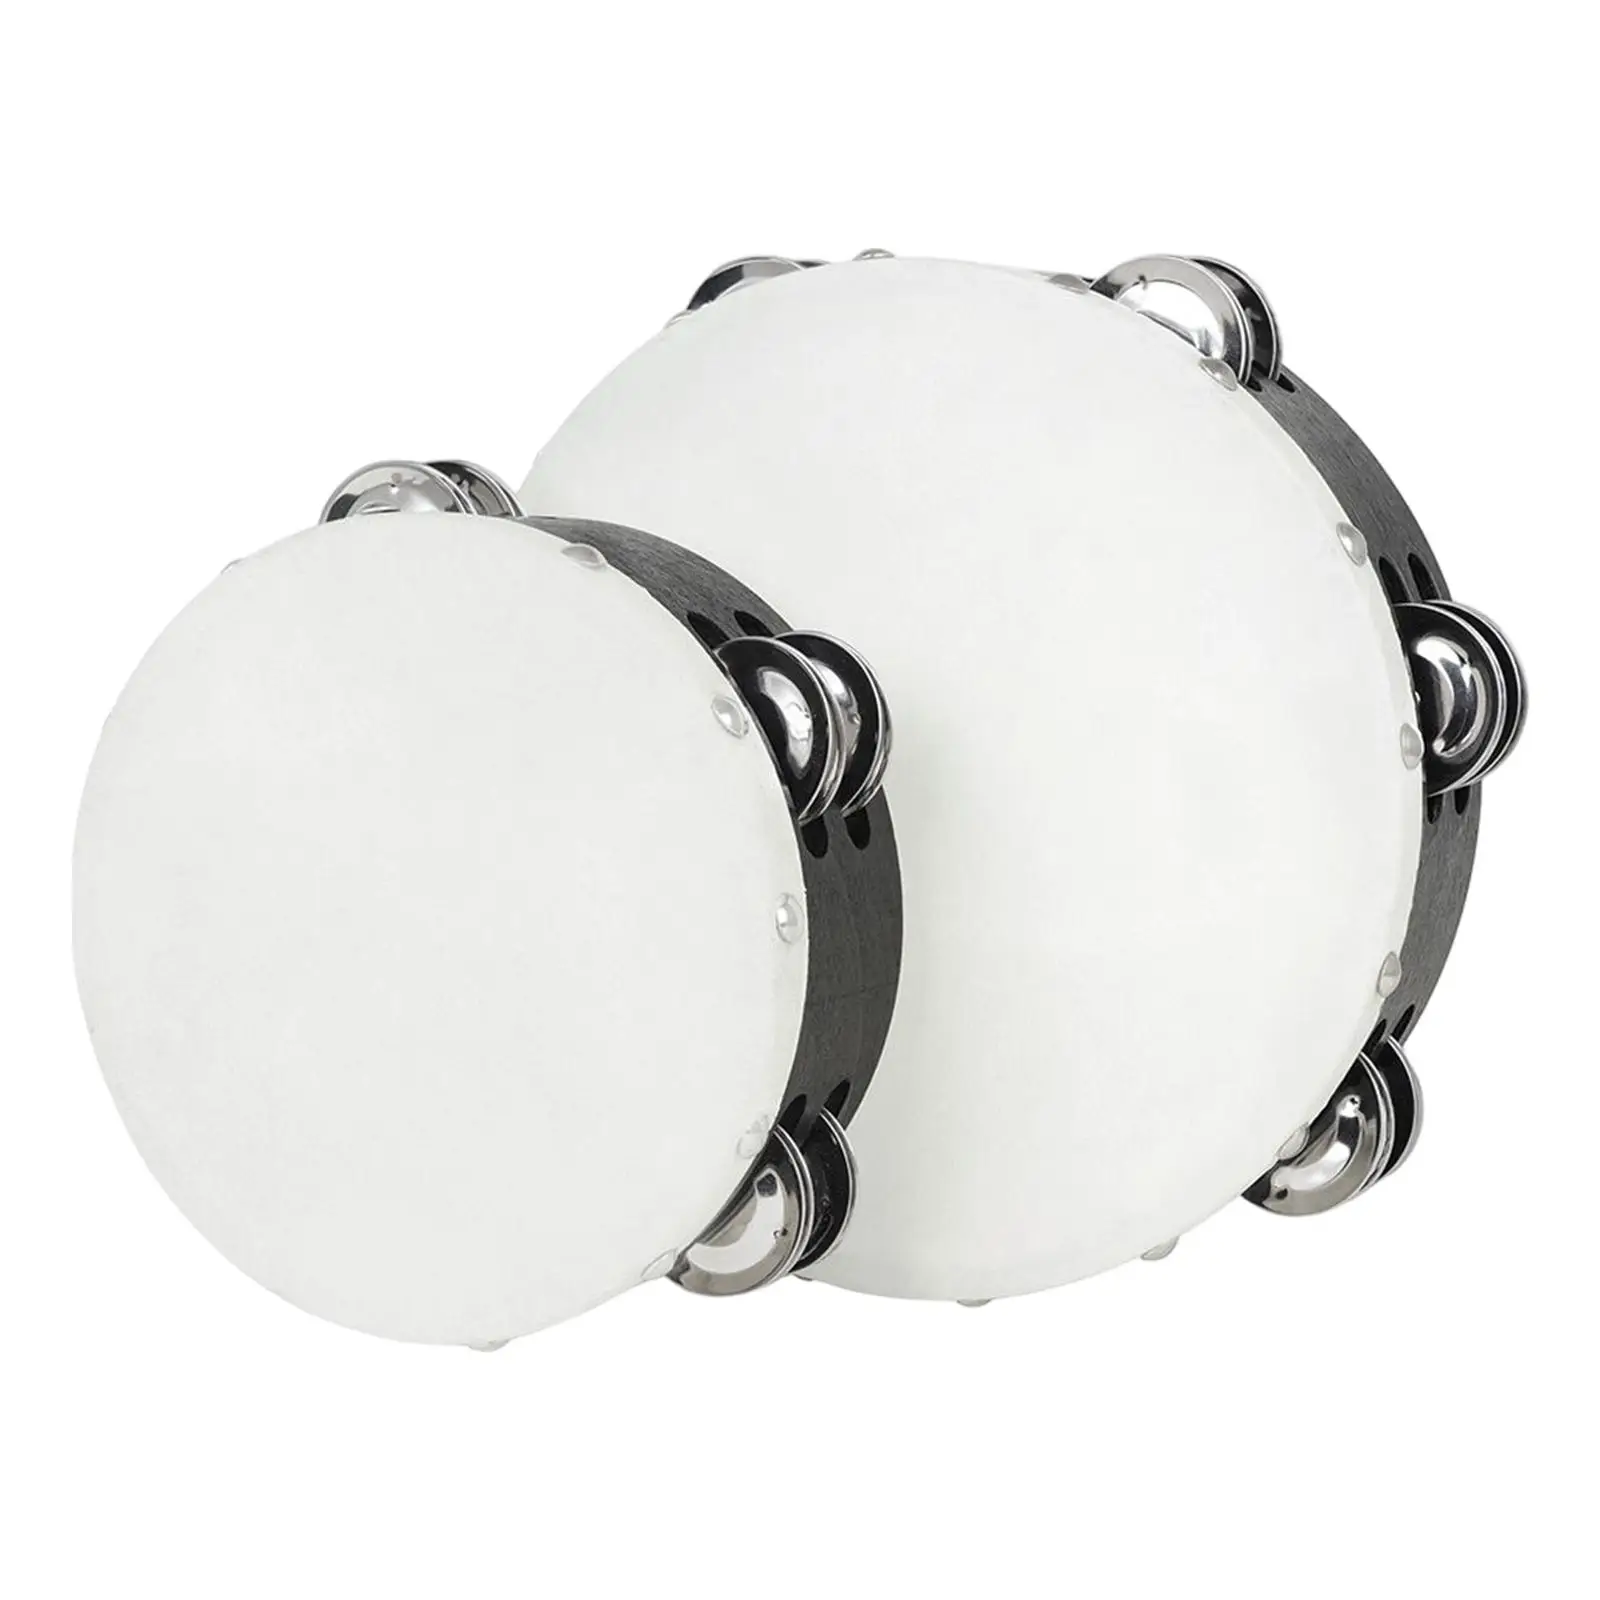 2Pcs Double Tambourines Hand Held Drum Hand Percussion Manual Wooden Tambourine for Games Projects Adults Party Church